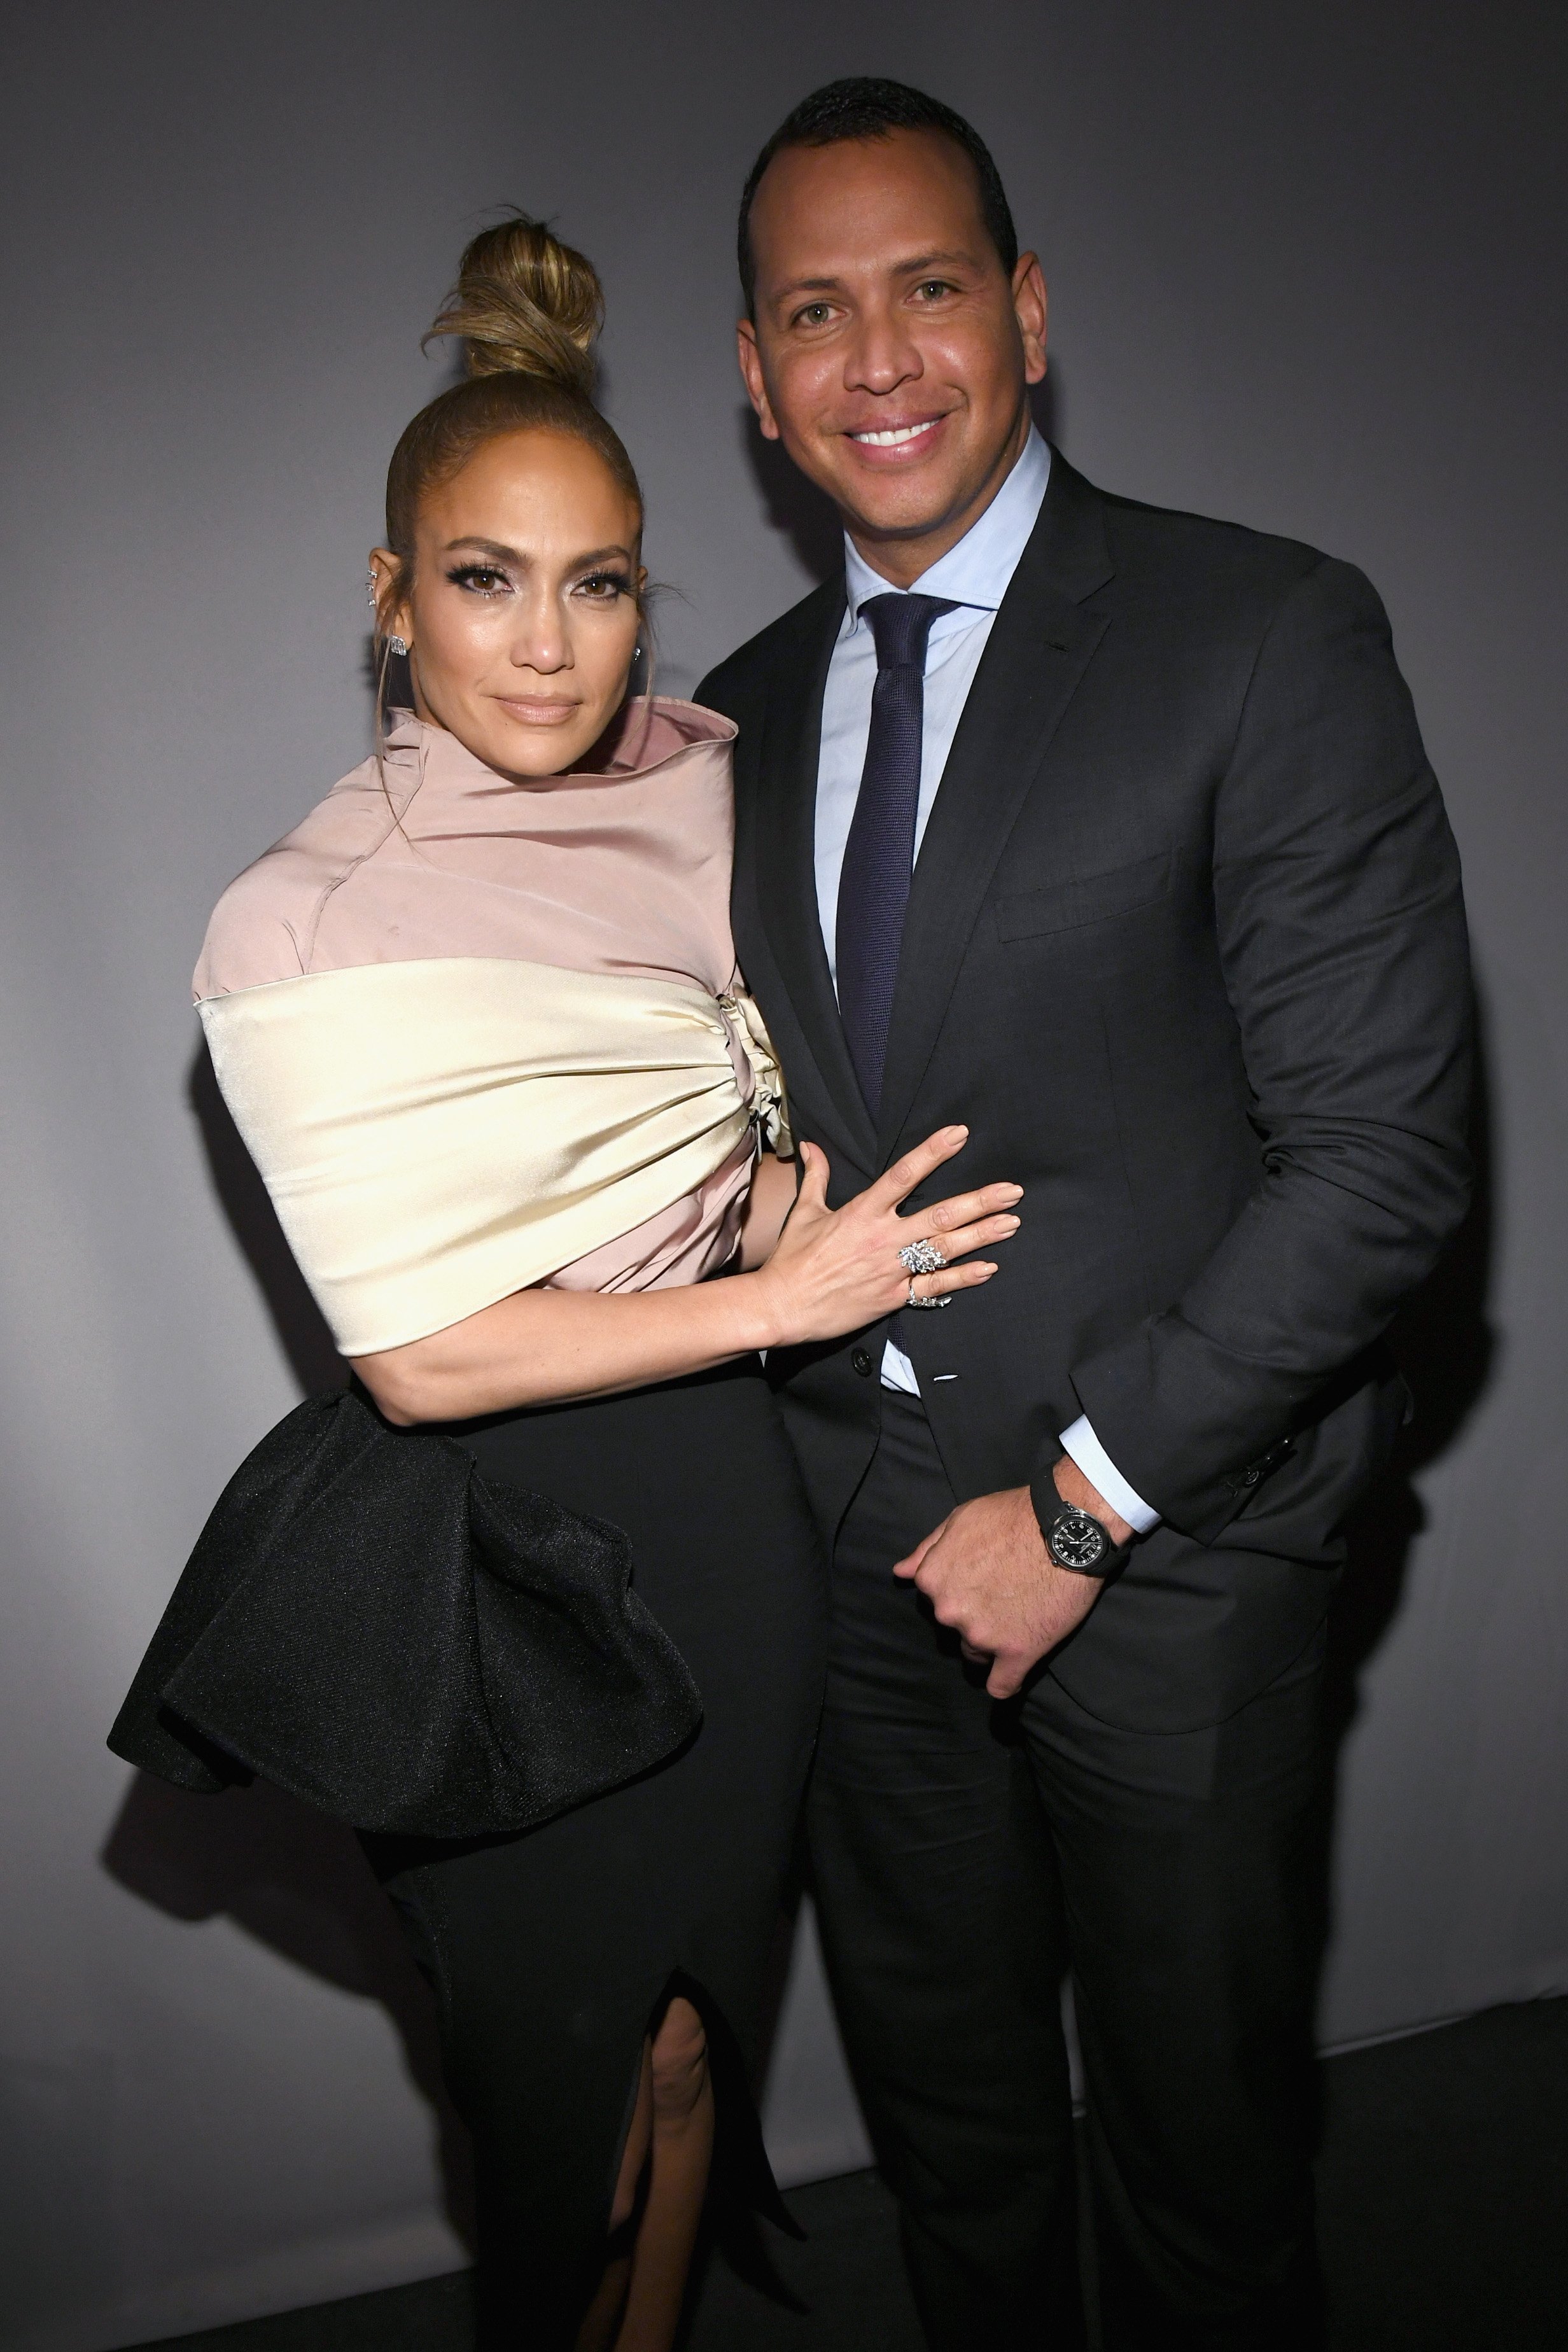 Jennifer Lopez and Alex Rodriguez attend ELLE's 25th Annual Women In Hollywood Celebration on October 15, 2018, in Los Angeles, California. | Source: Getty Images.